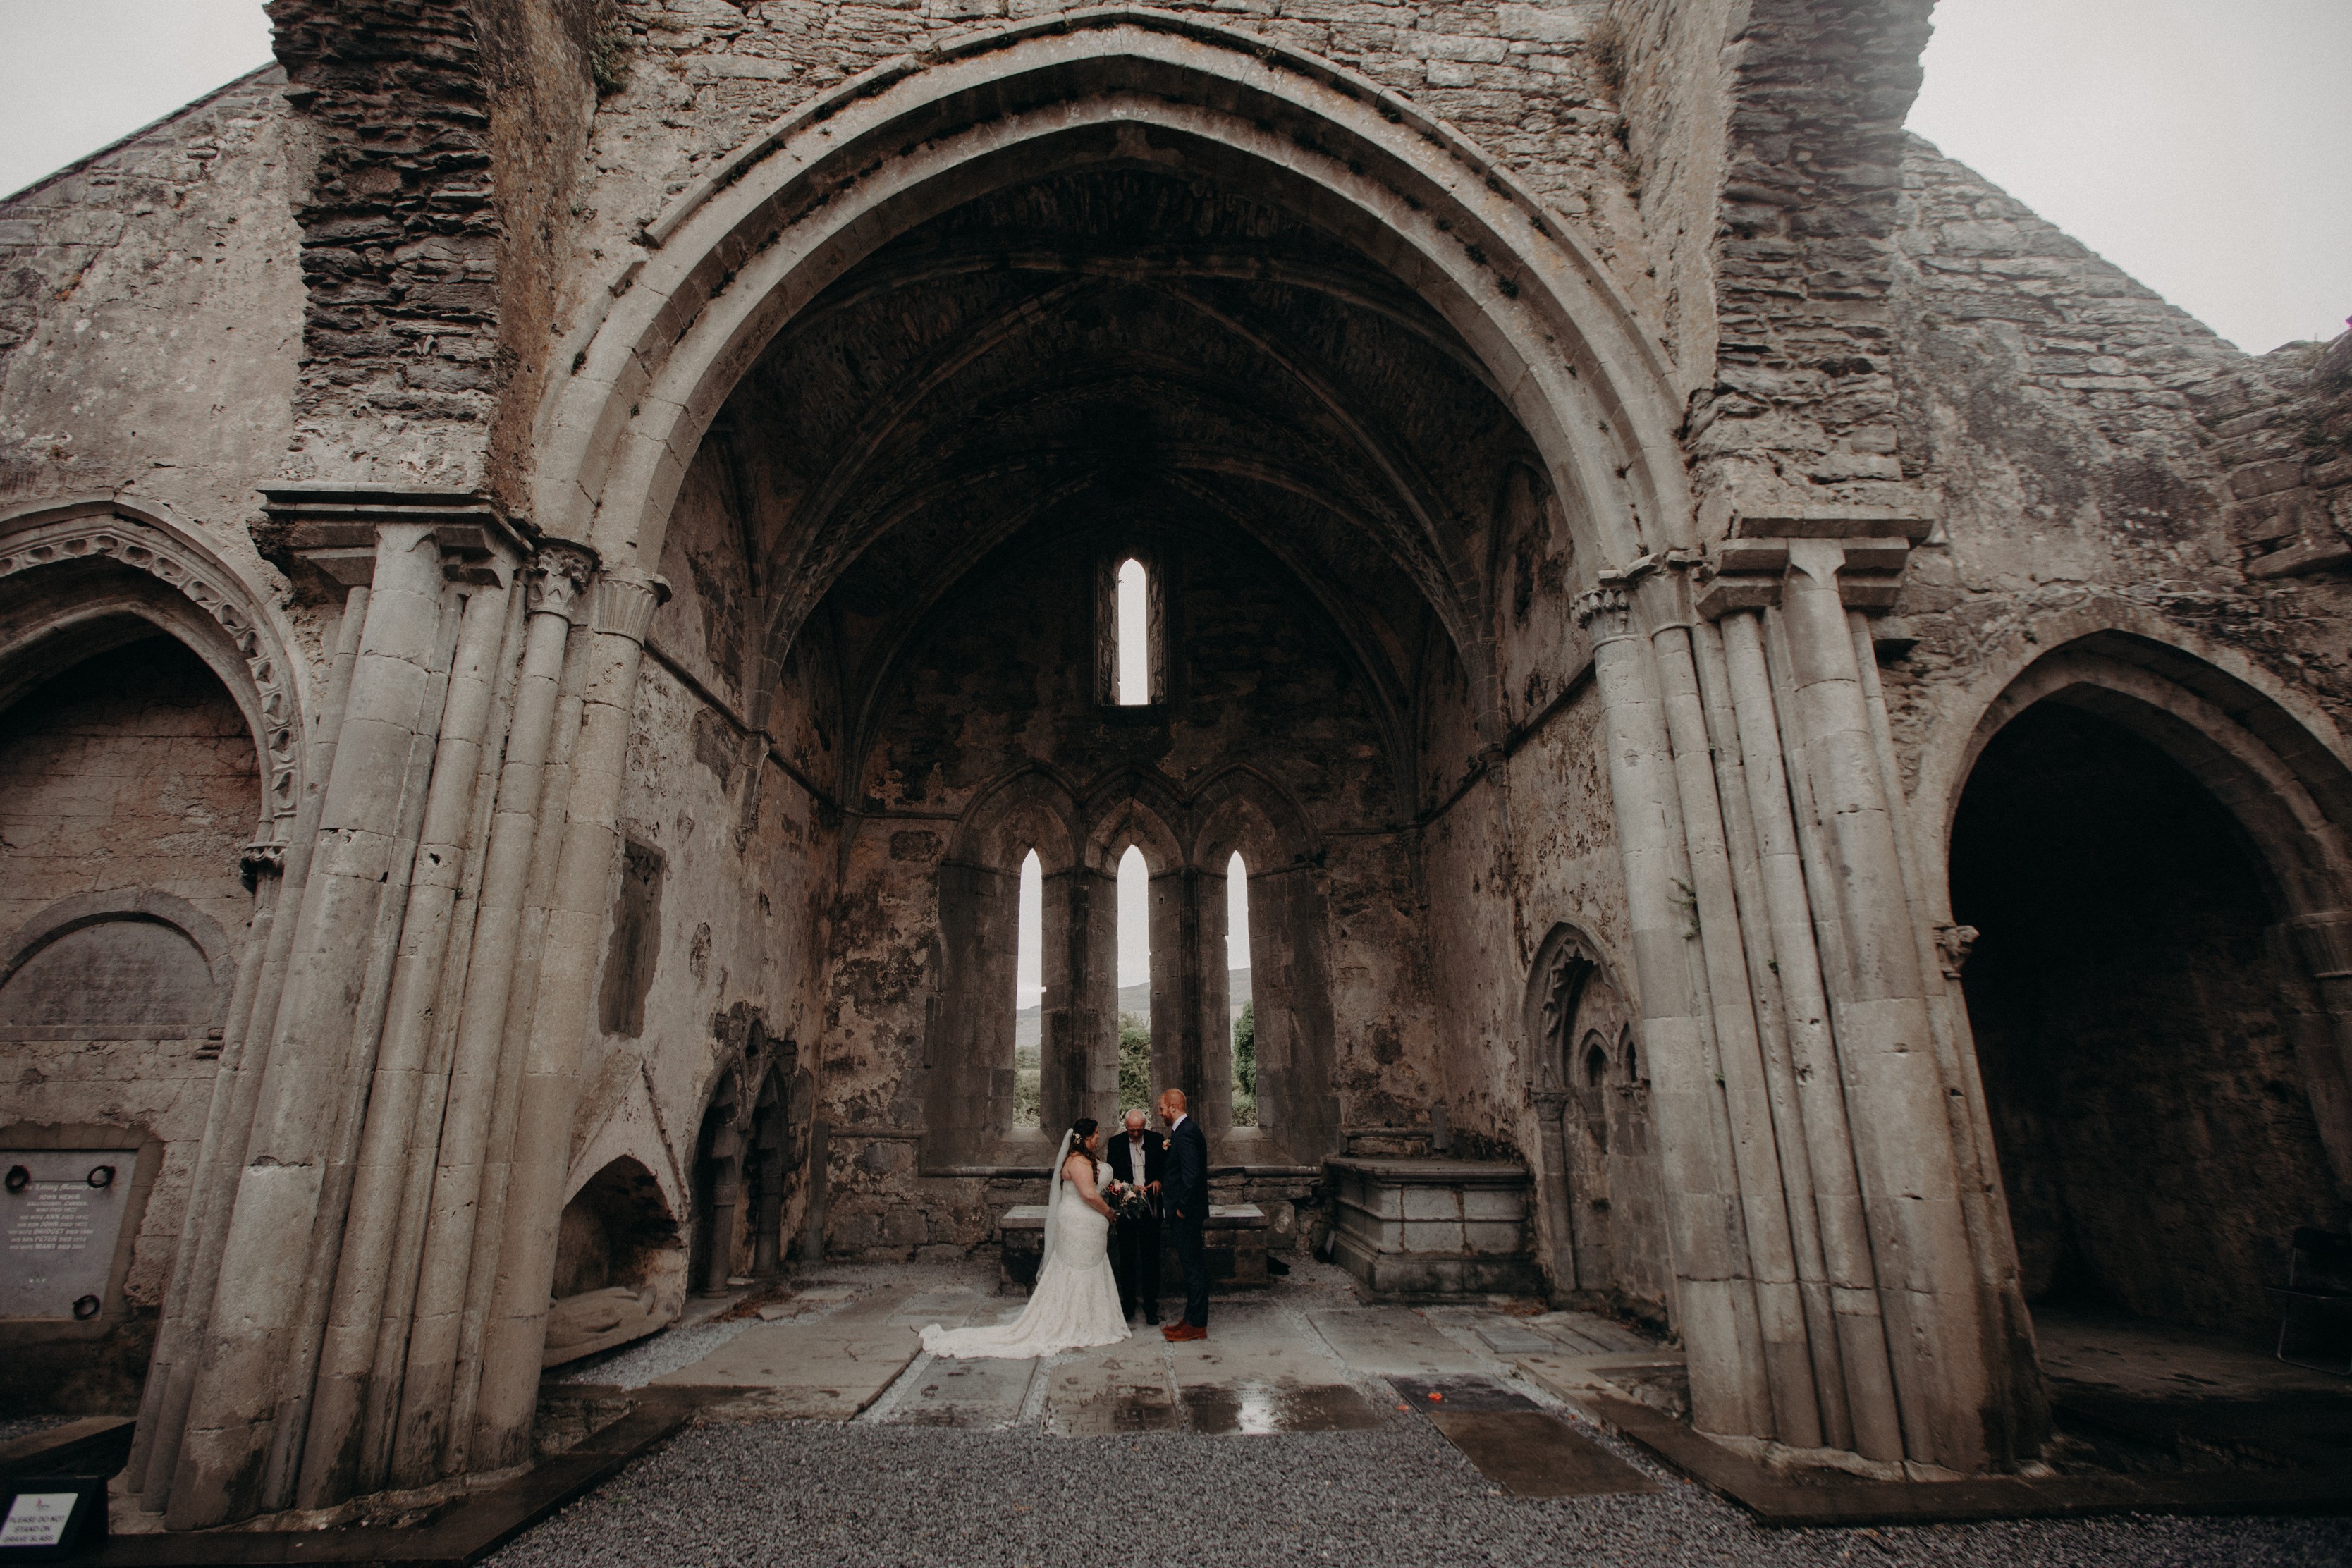 A Moody Dreamy Elopement - Kate & Phillip - Elope to Ireland